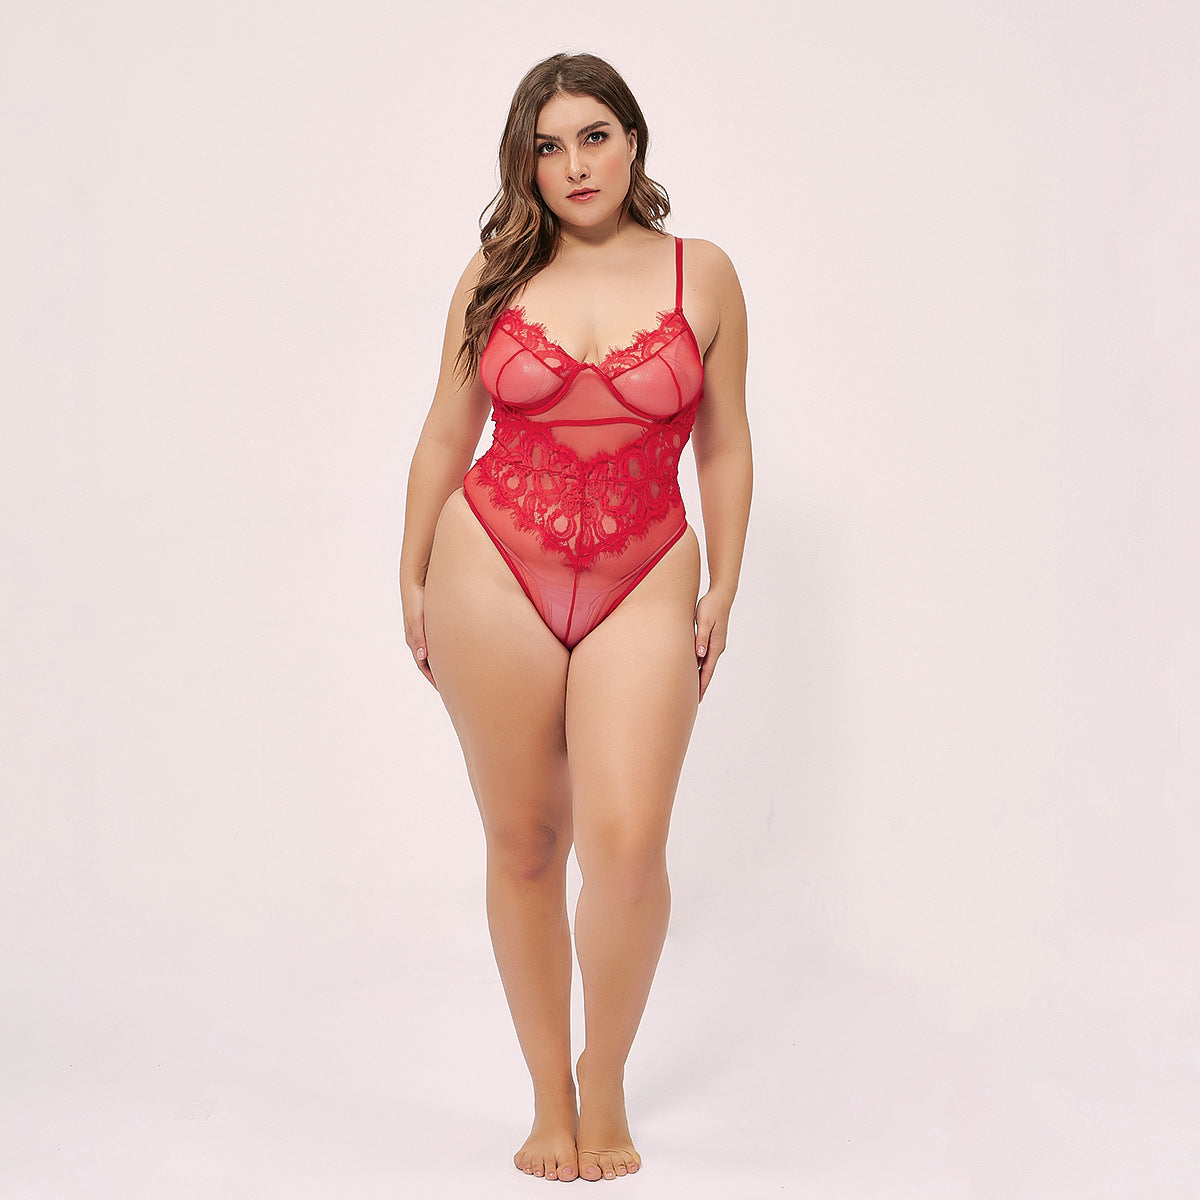 CB Sultry Lingerie freeshipping - Cassy's Boutique